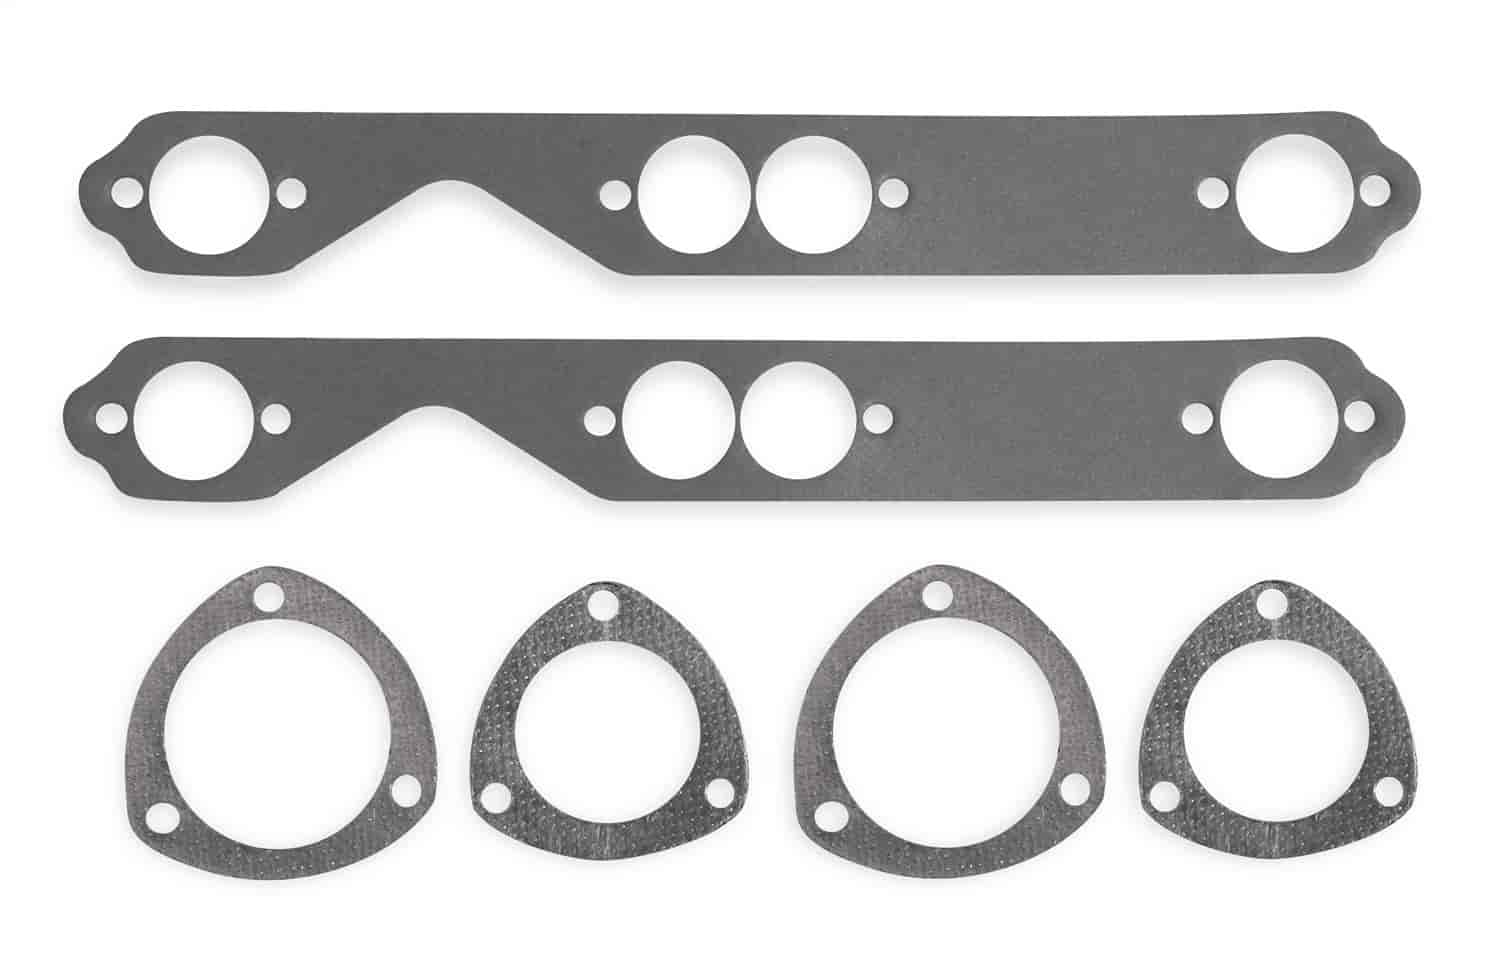 Header Replacement Gasket Set Small Block Chevy Flowtech Shorty and Afterburner Headers Includes 3" Collector Gaskets